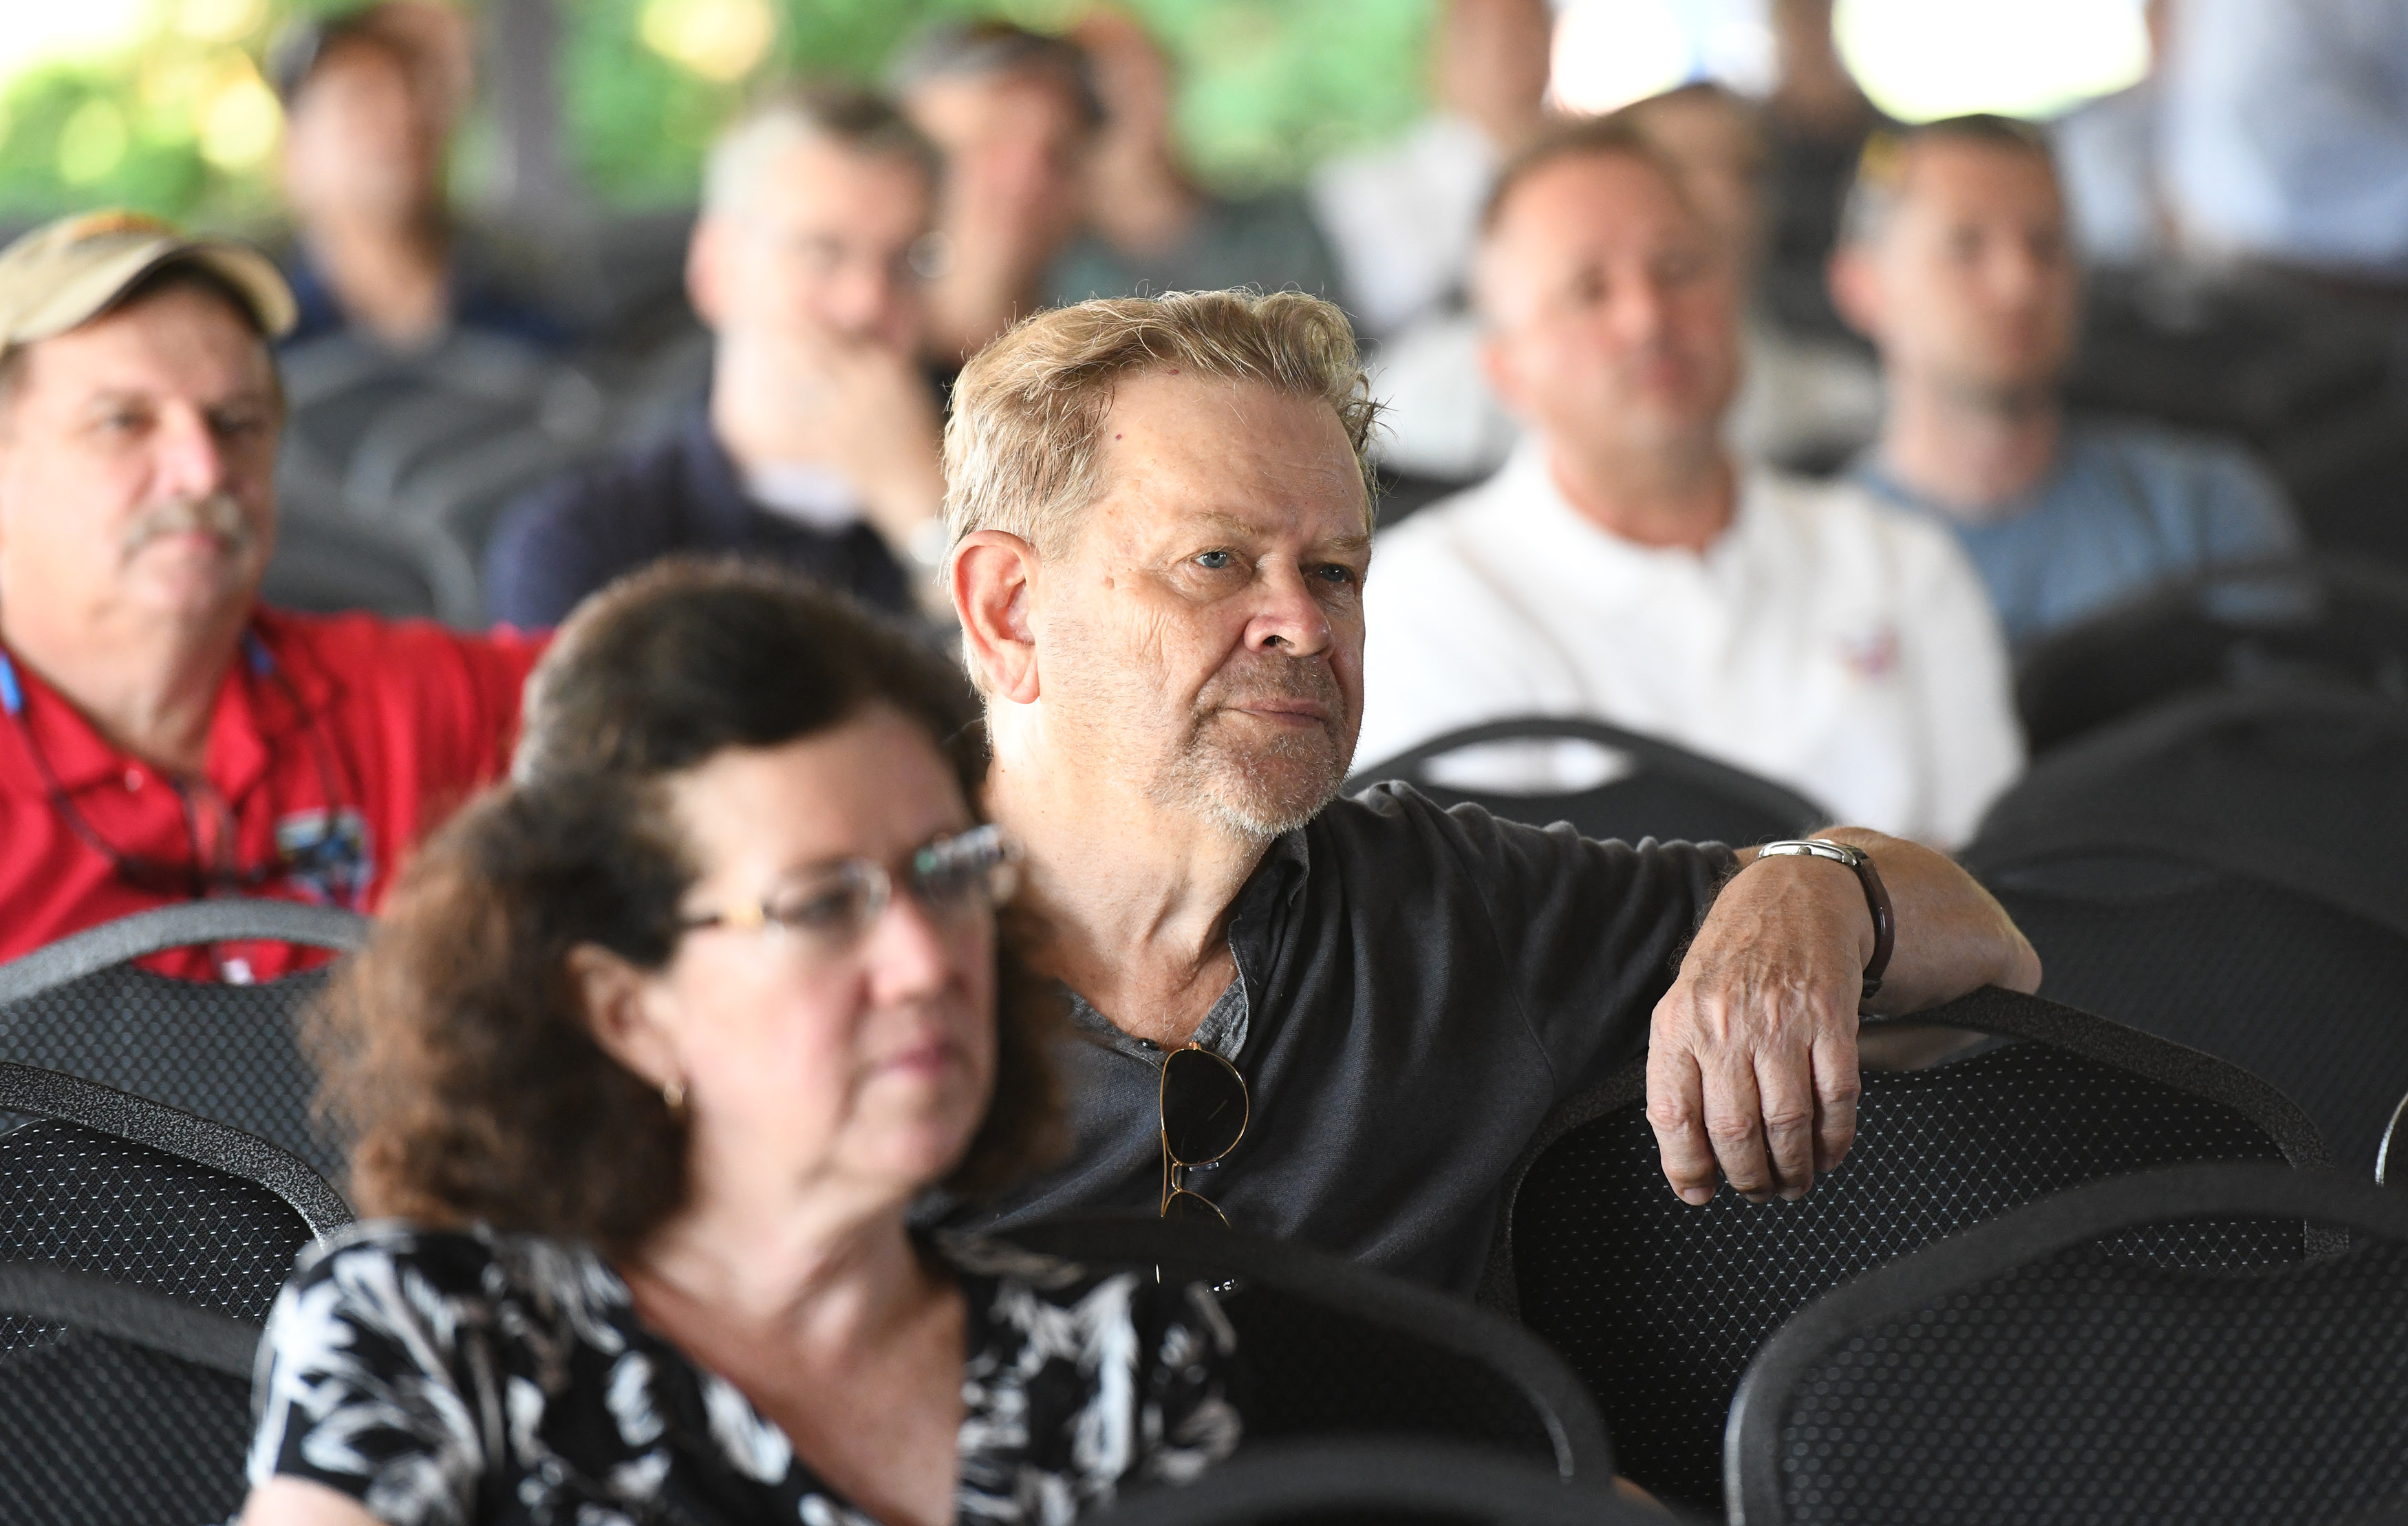 Attendees participate in a general aviation safety road show on preventing in-flight loss of control during EAA AirVenture in Oshkosh, Wisconsin, July 24, 2018. Photo by David Tulis.